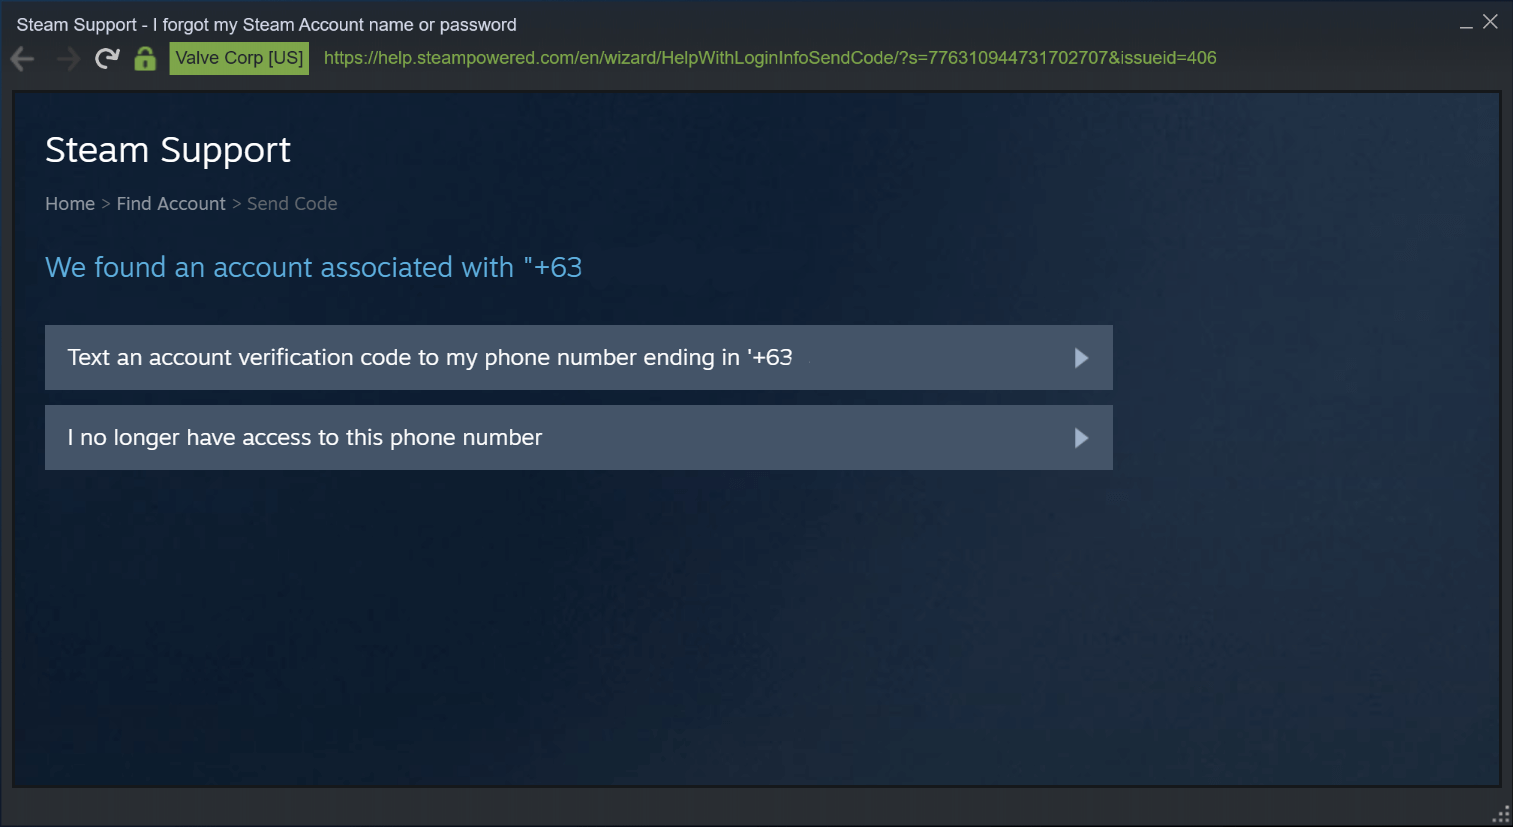 How to Recover Your Steam Account Lost Password?